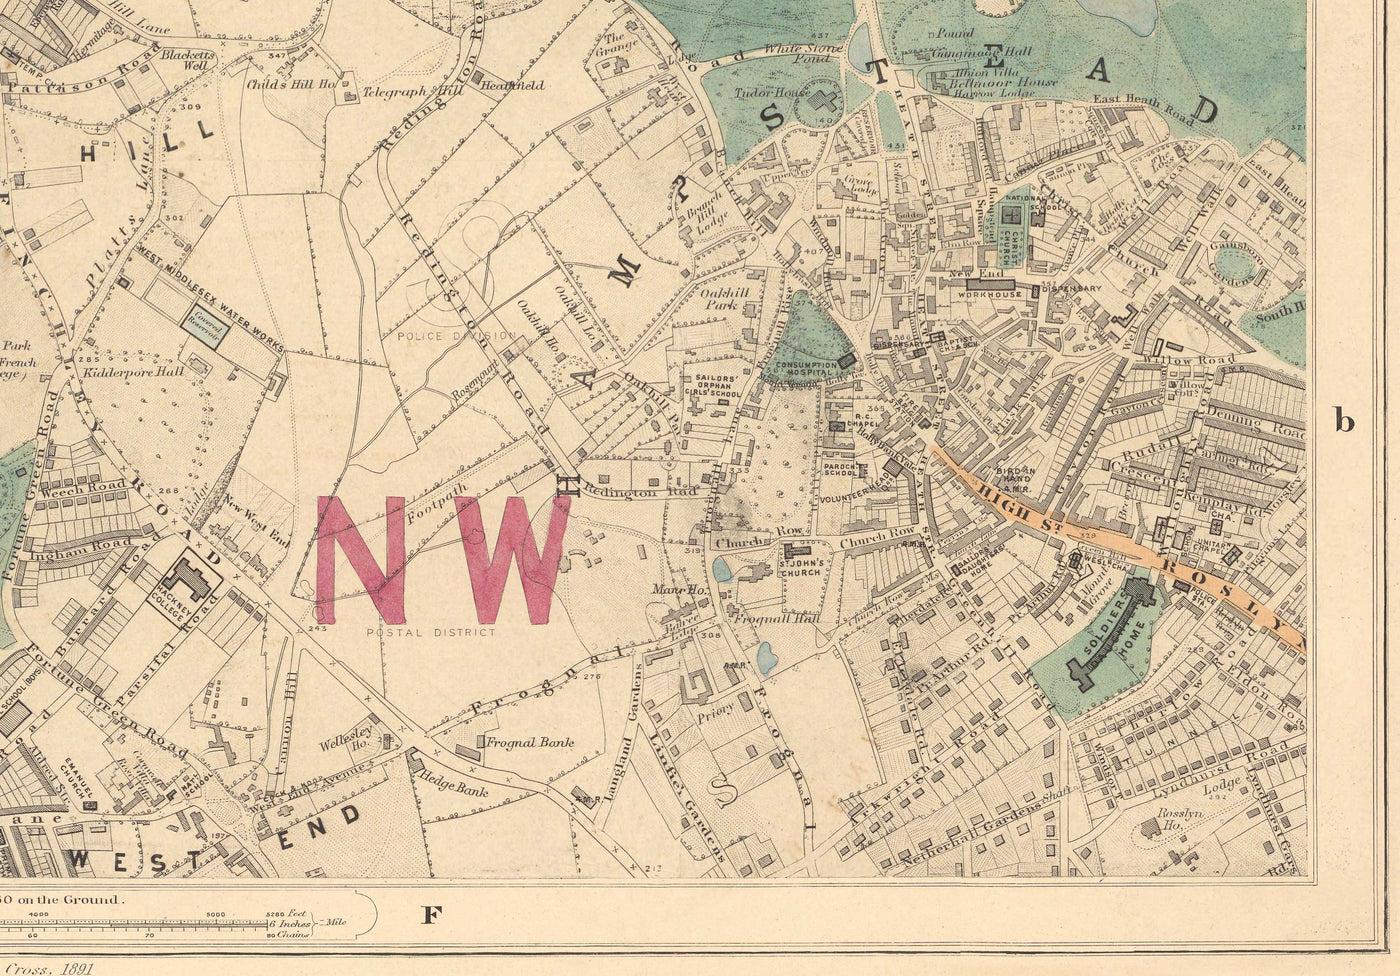 Alte Farbkarte von Nord-London, 1891 - Hampstead, Cricklewood, Golders Green, Brent - NW2, NW3, NW11, NW4